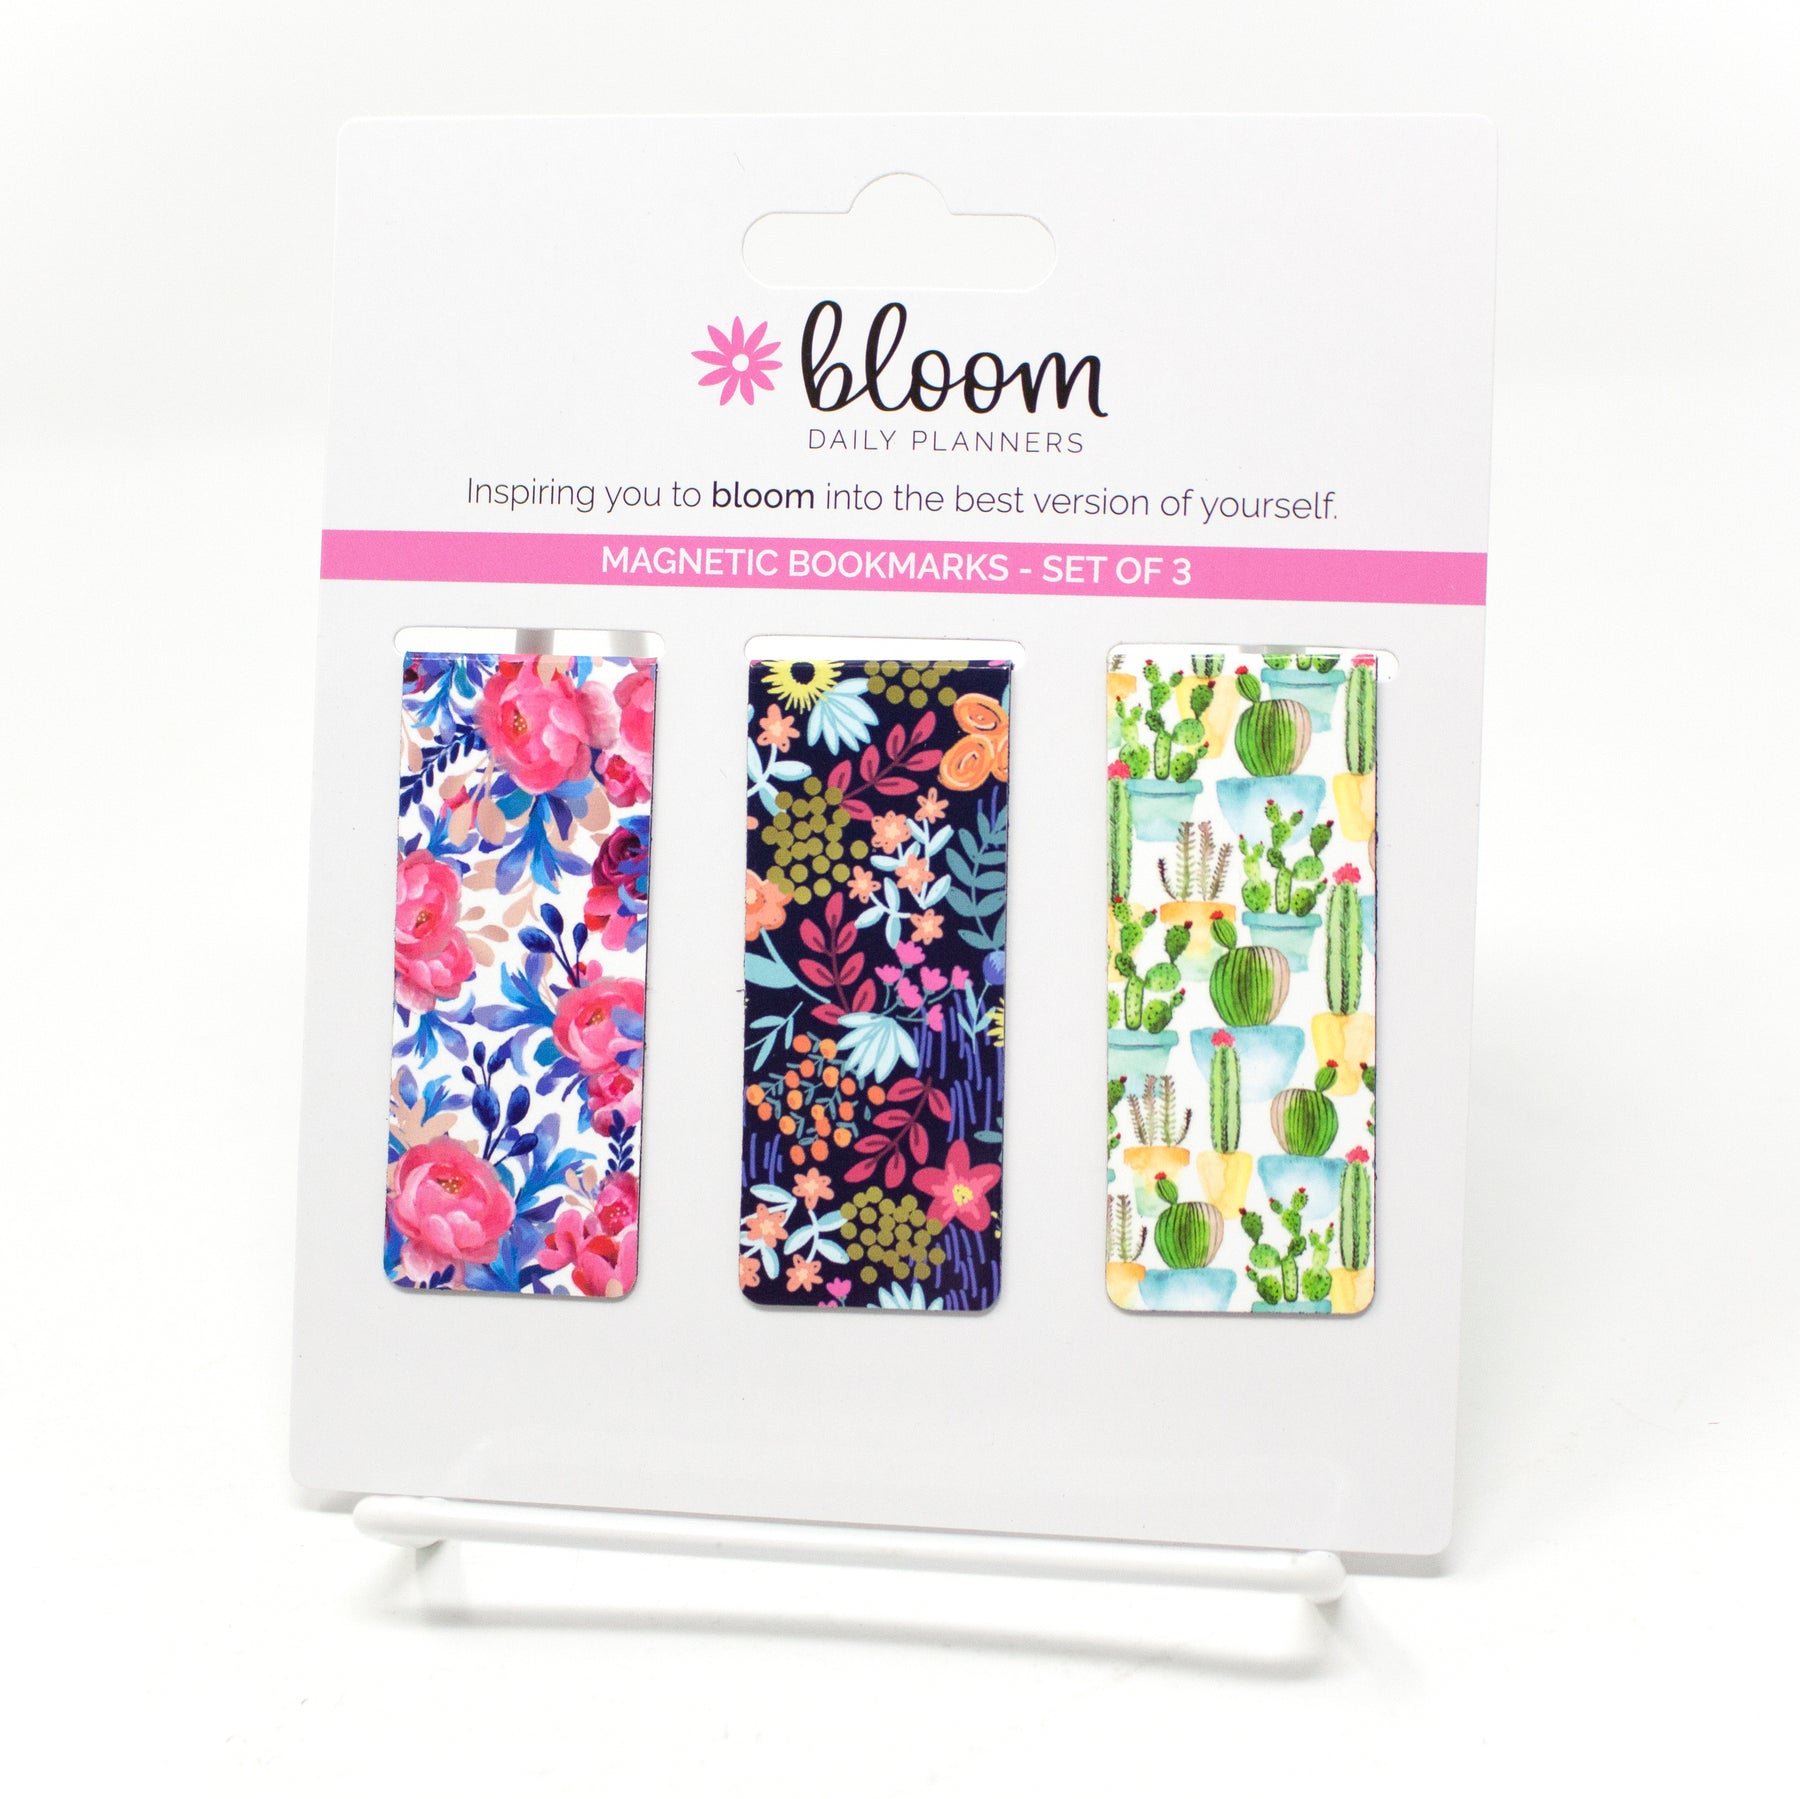 https://bloomplanners.com/cdn/shop/products/001___magnetic_bookmarks_botanical___bloom_daily_planners_organization_office_supplies_floral_colorful_painted_cacti_cactus_watercolor_trendy_girly_cute_women_planning_1800x1800.jpg?v=1643215215